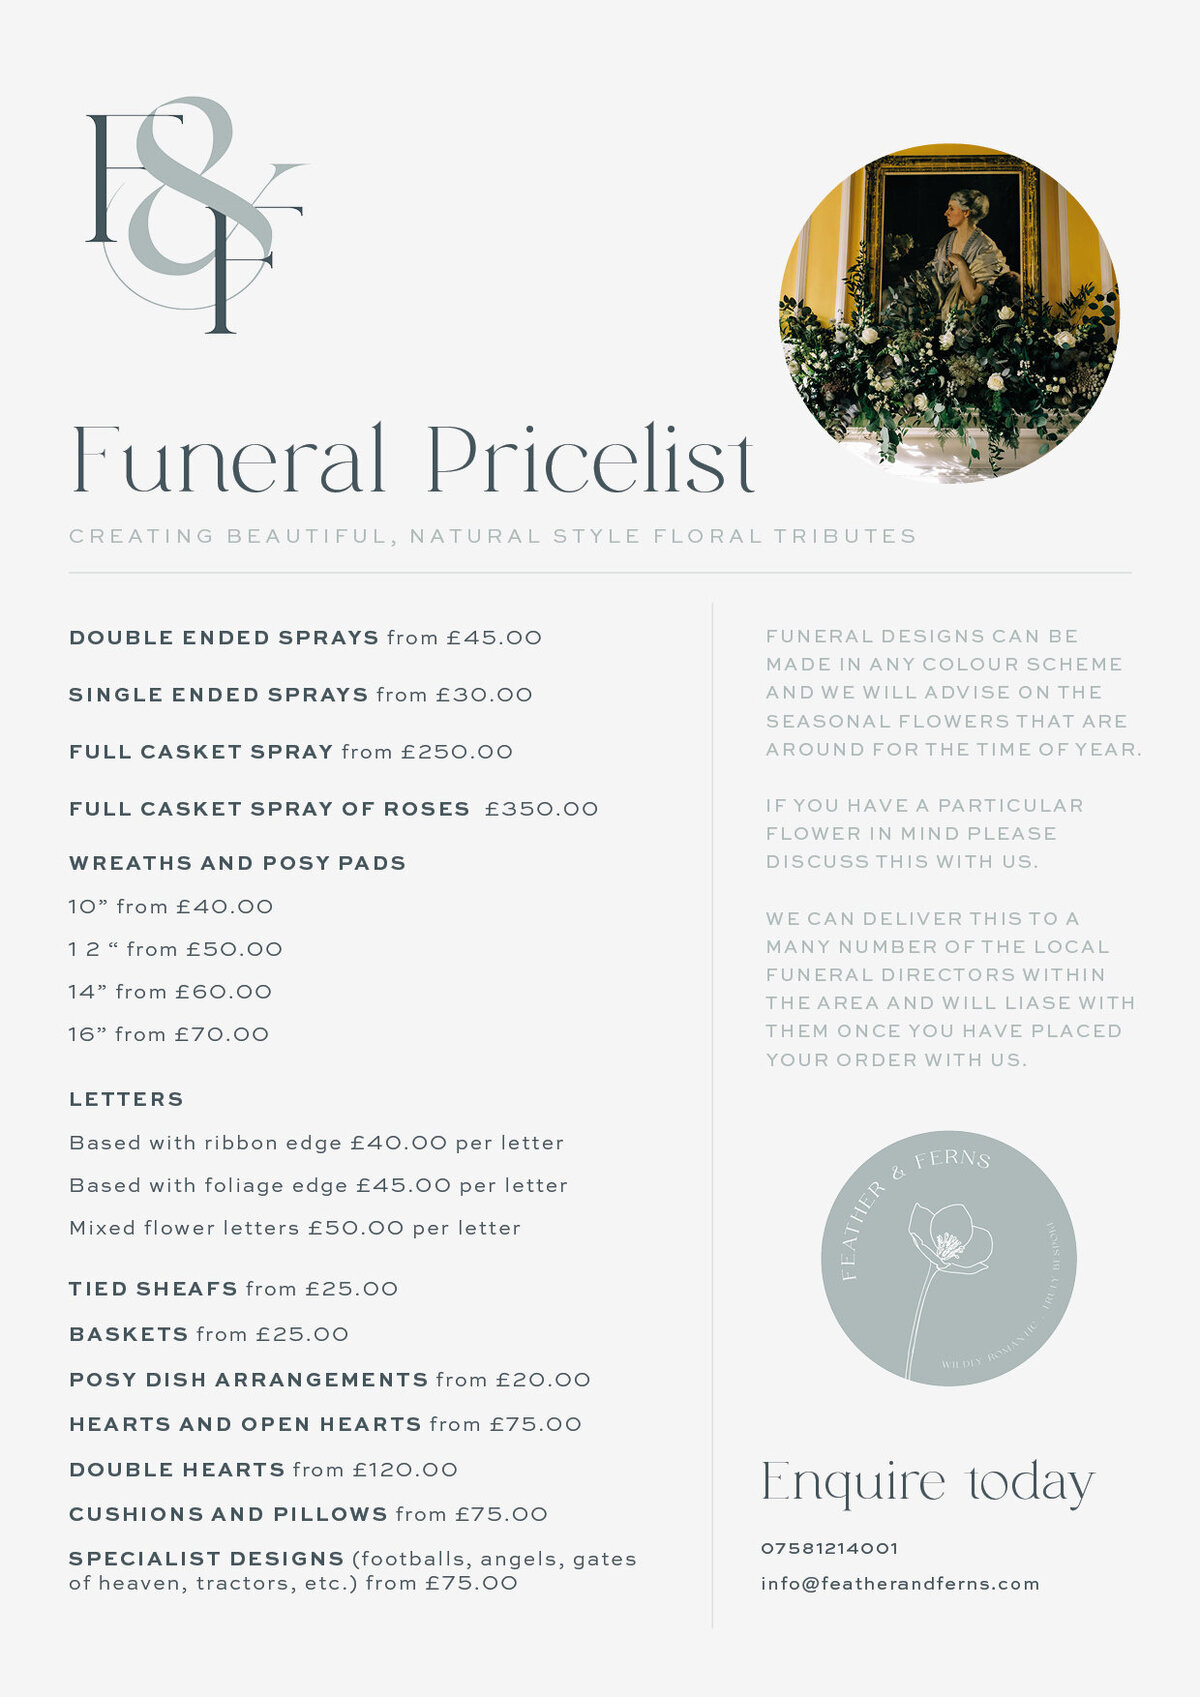 Funeral Price List image